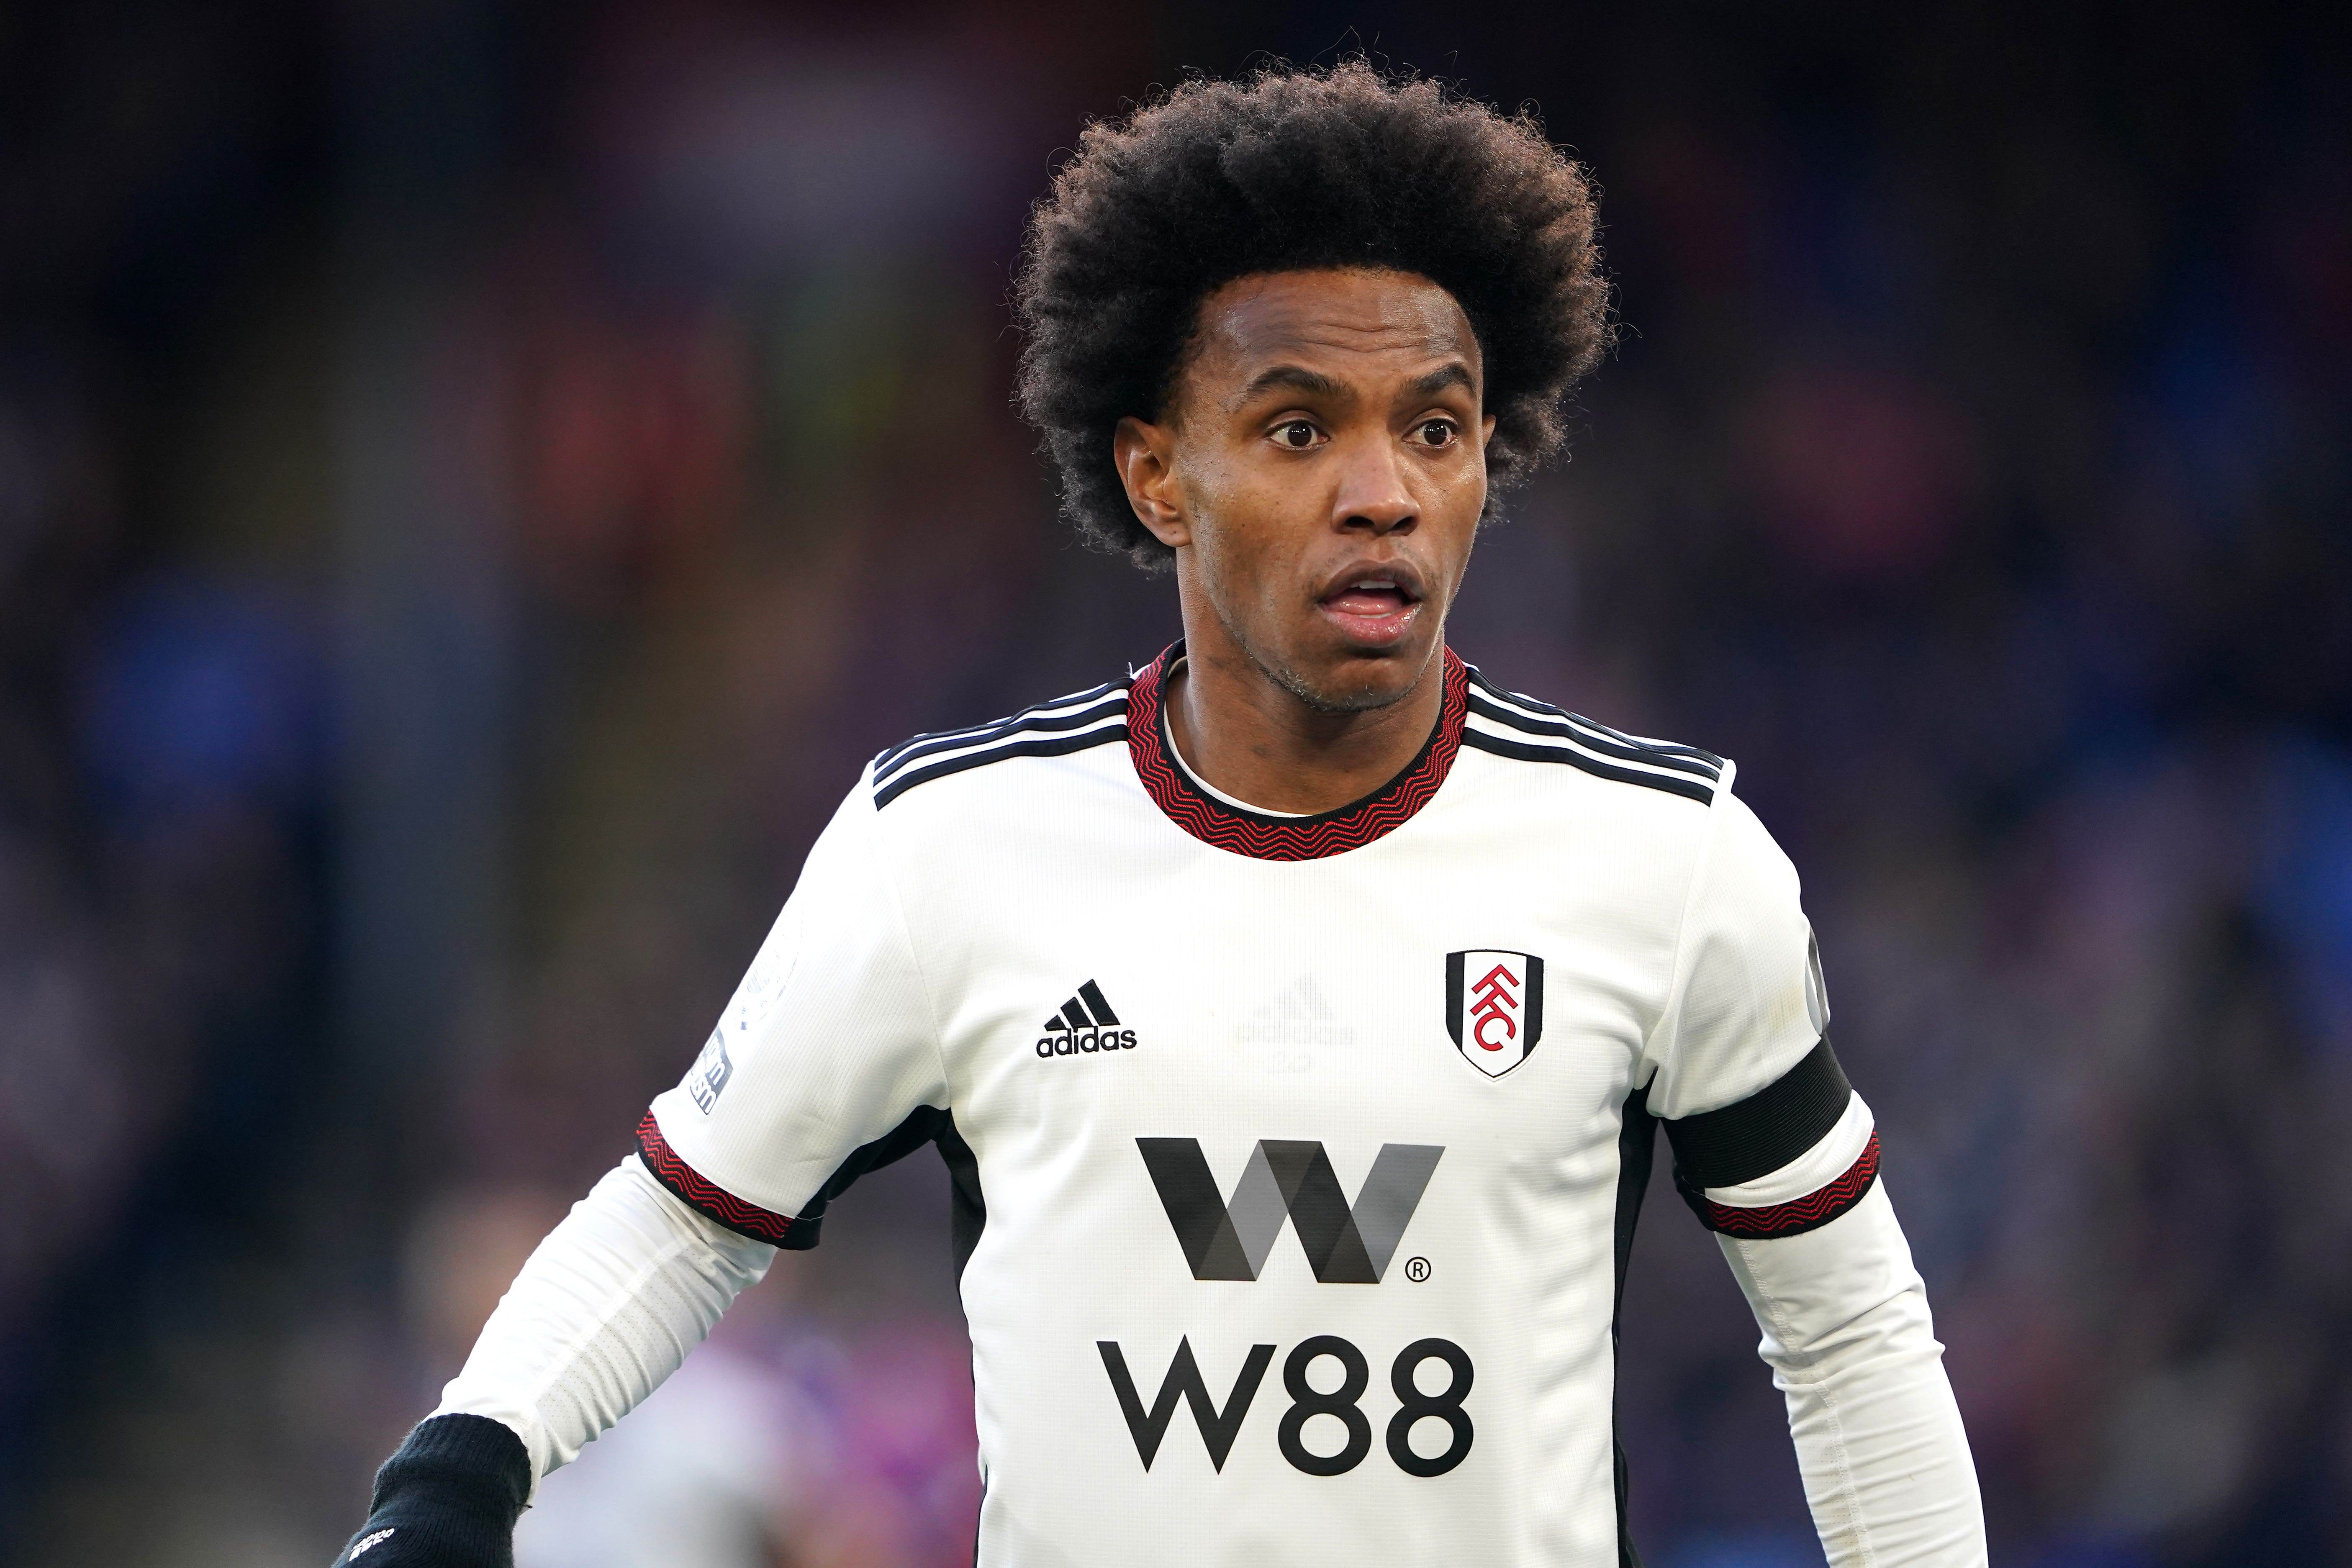 Fulham midfielder Willian has impressed on his return to the Premier League (Zac Goodwin/PA)